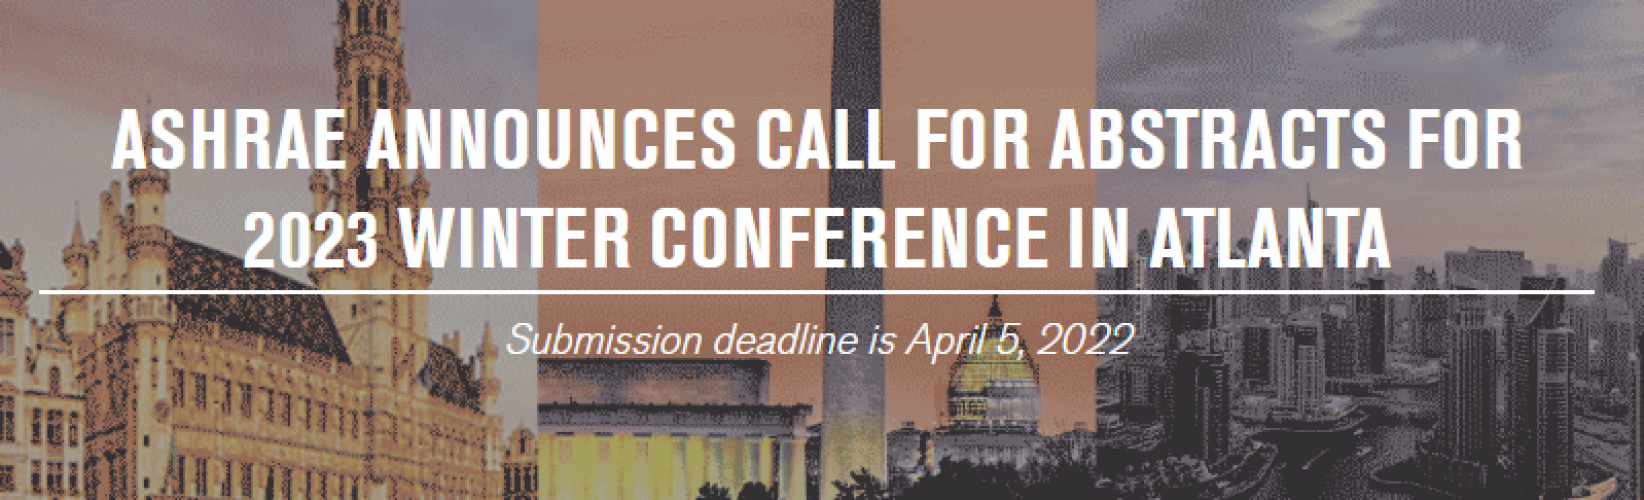 ASHRAE Announces Call for Abstracts for 2023 Winter Conference in Atlanta